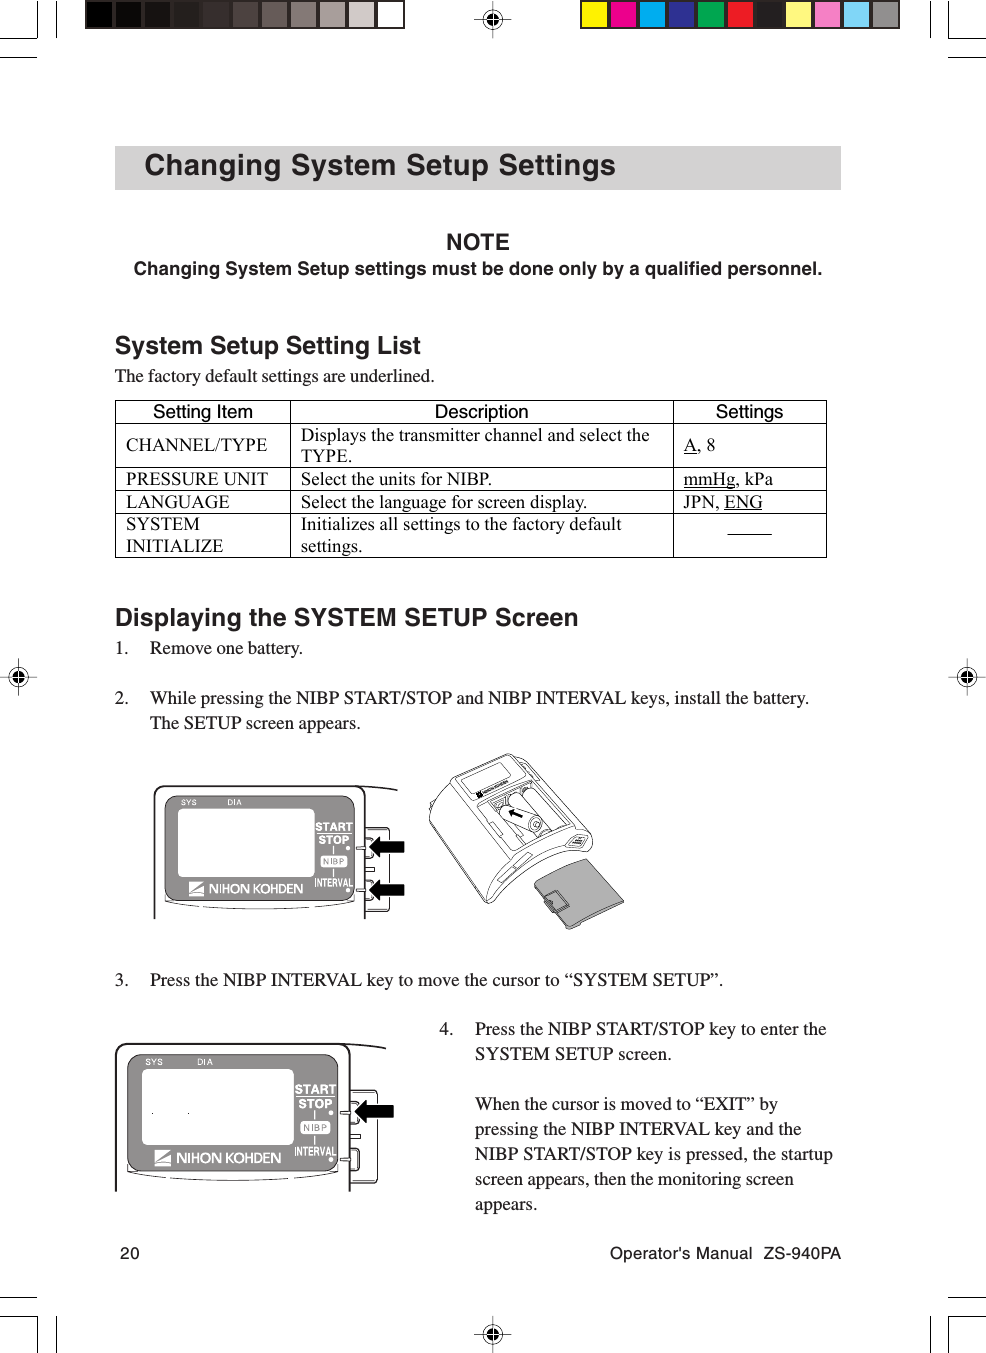 20 Operator&apos;s Manual  ZS-940PAChanging System Setup SettingsNOTEChanging System Setup settings must be done only by a qualified personnel.System Setup Setting ListThe factory default settings are underlined.Setting Item Description SettingsCHANNEL/TYPE Displays the transmitter channel and select theTYPE. A, 8PRESSURE UNIT Select the units for NIBP. mmHg, kPaLANGUAGE Select the language for screen display. JPN, ENGSYSTEMINITIALIZEInitializes all settings to the factory defaultsettings.Displaying the SYSTEM SETUP Screen1. Remove one battery.2. While pressing the NIBP START/STOP and NIBP INTERVAL keys, install the battery.The SETUP screen appears.3. Press the NIBP INTERVAL key to move the cursor to “SYSTEM SETUP”.4. Press the NIBP START/STOP key to enter theSYSTEM SETUP screen.When the cursor is moved to “EXIT” bypressing the NIBP INTERVAL key and theNIBP START/STOP key is pressed, the startupscreen appears, then the monitoring screenappears.